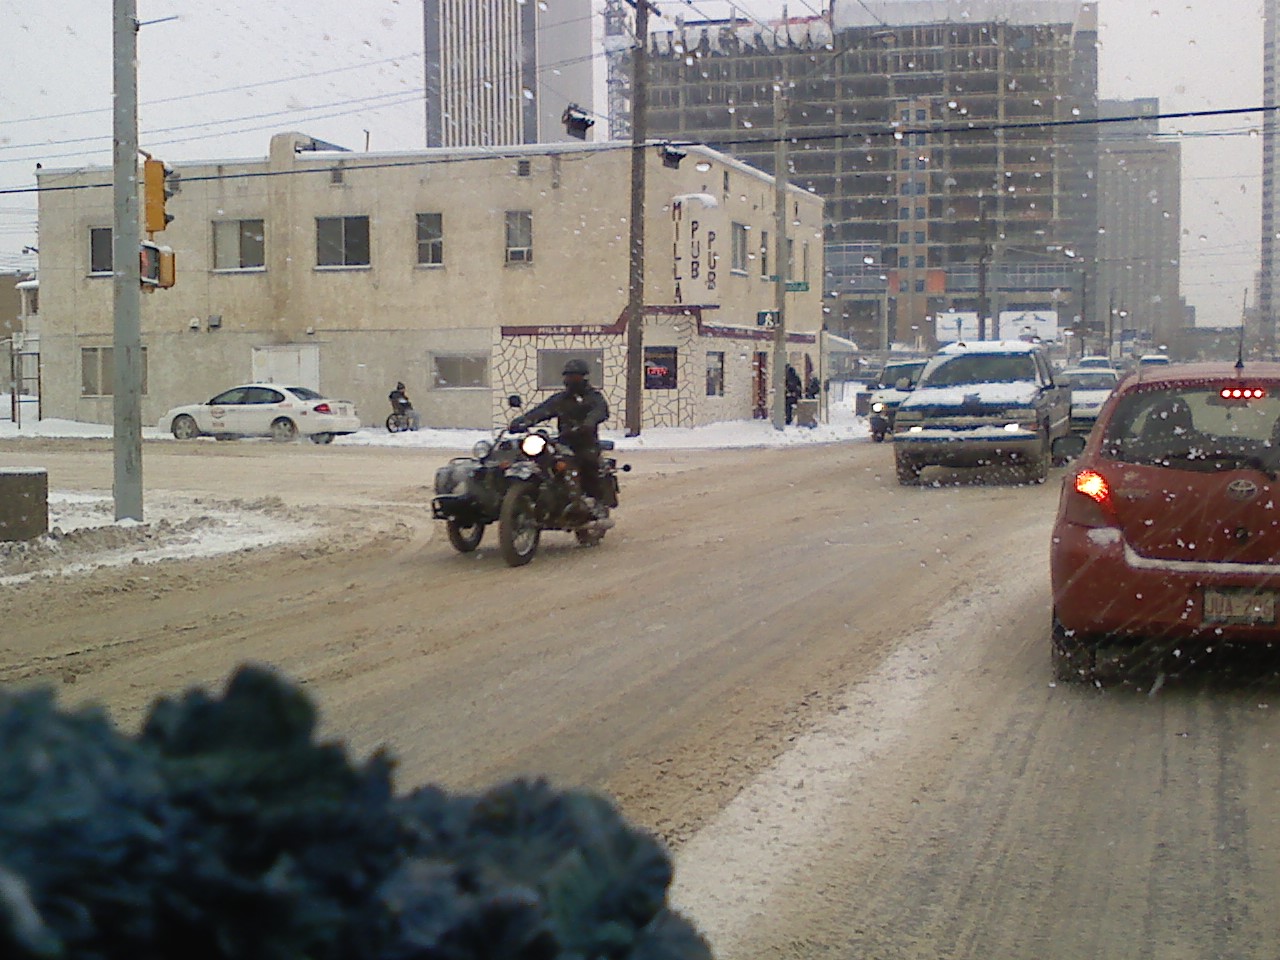 Motorcycle sidecar in Winter